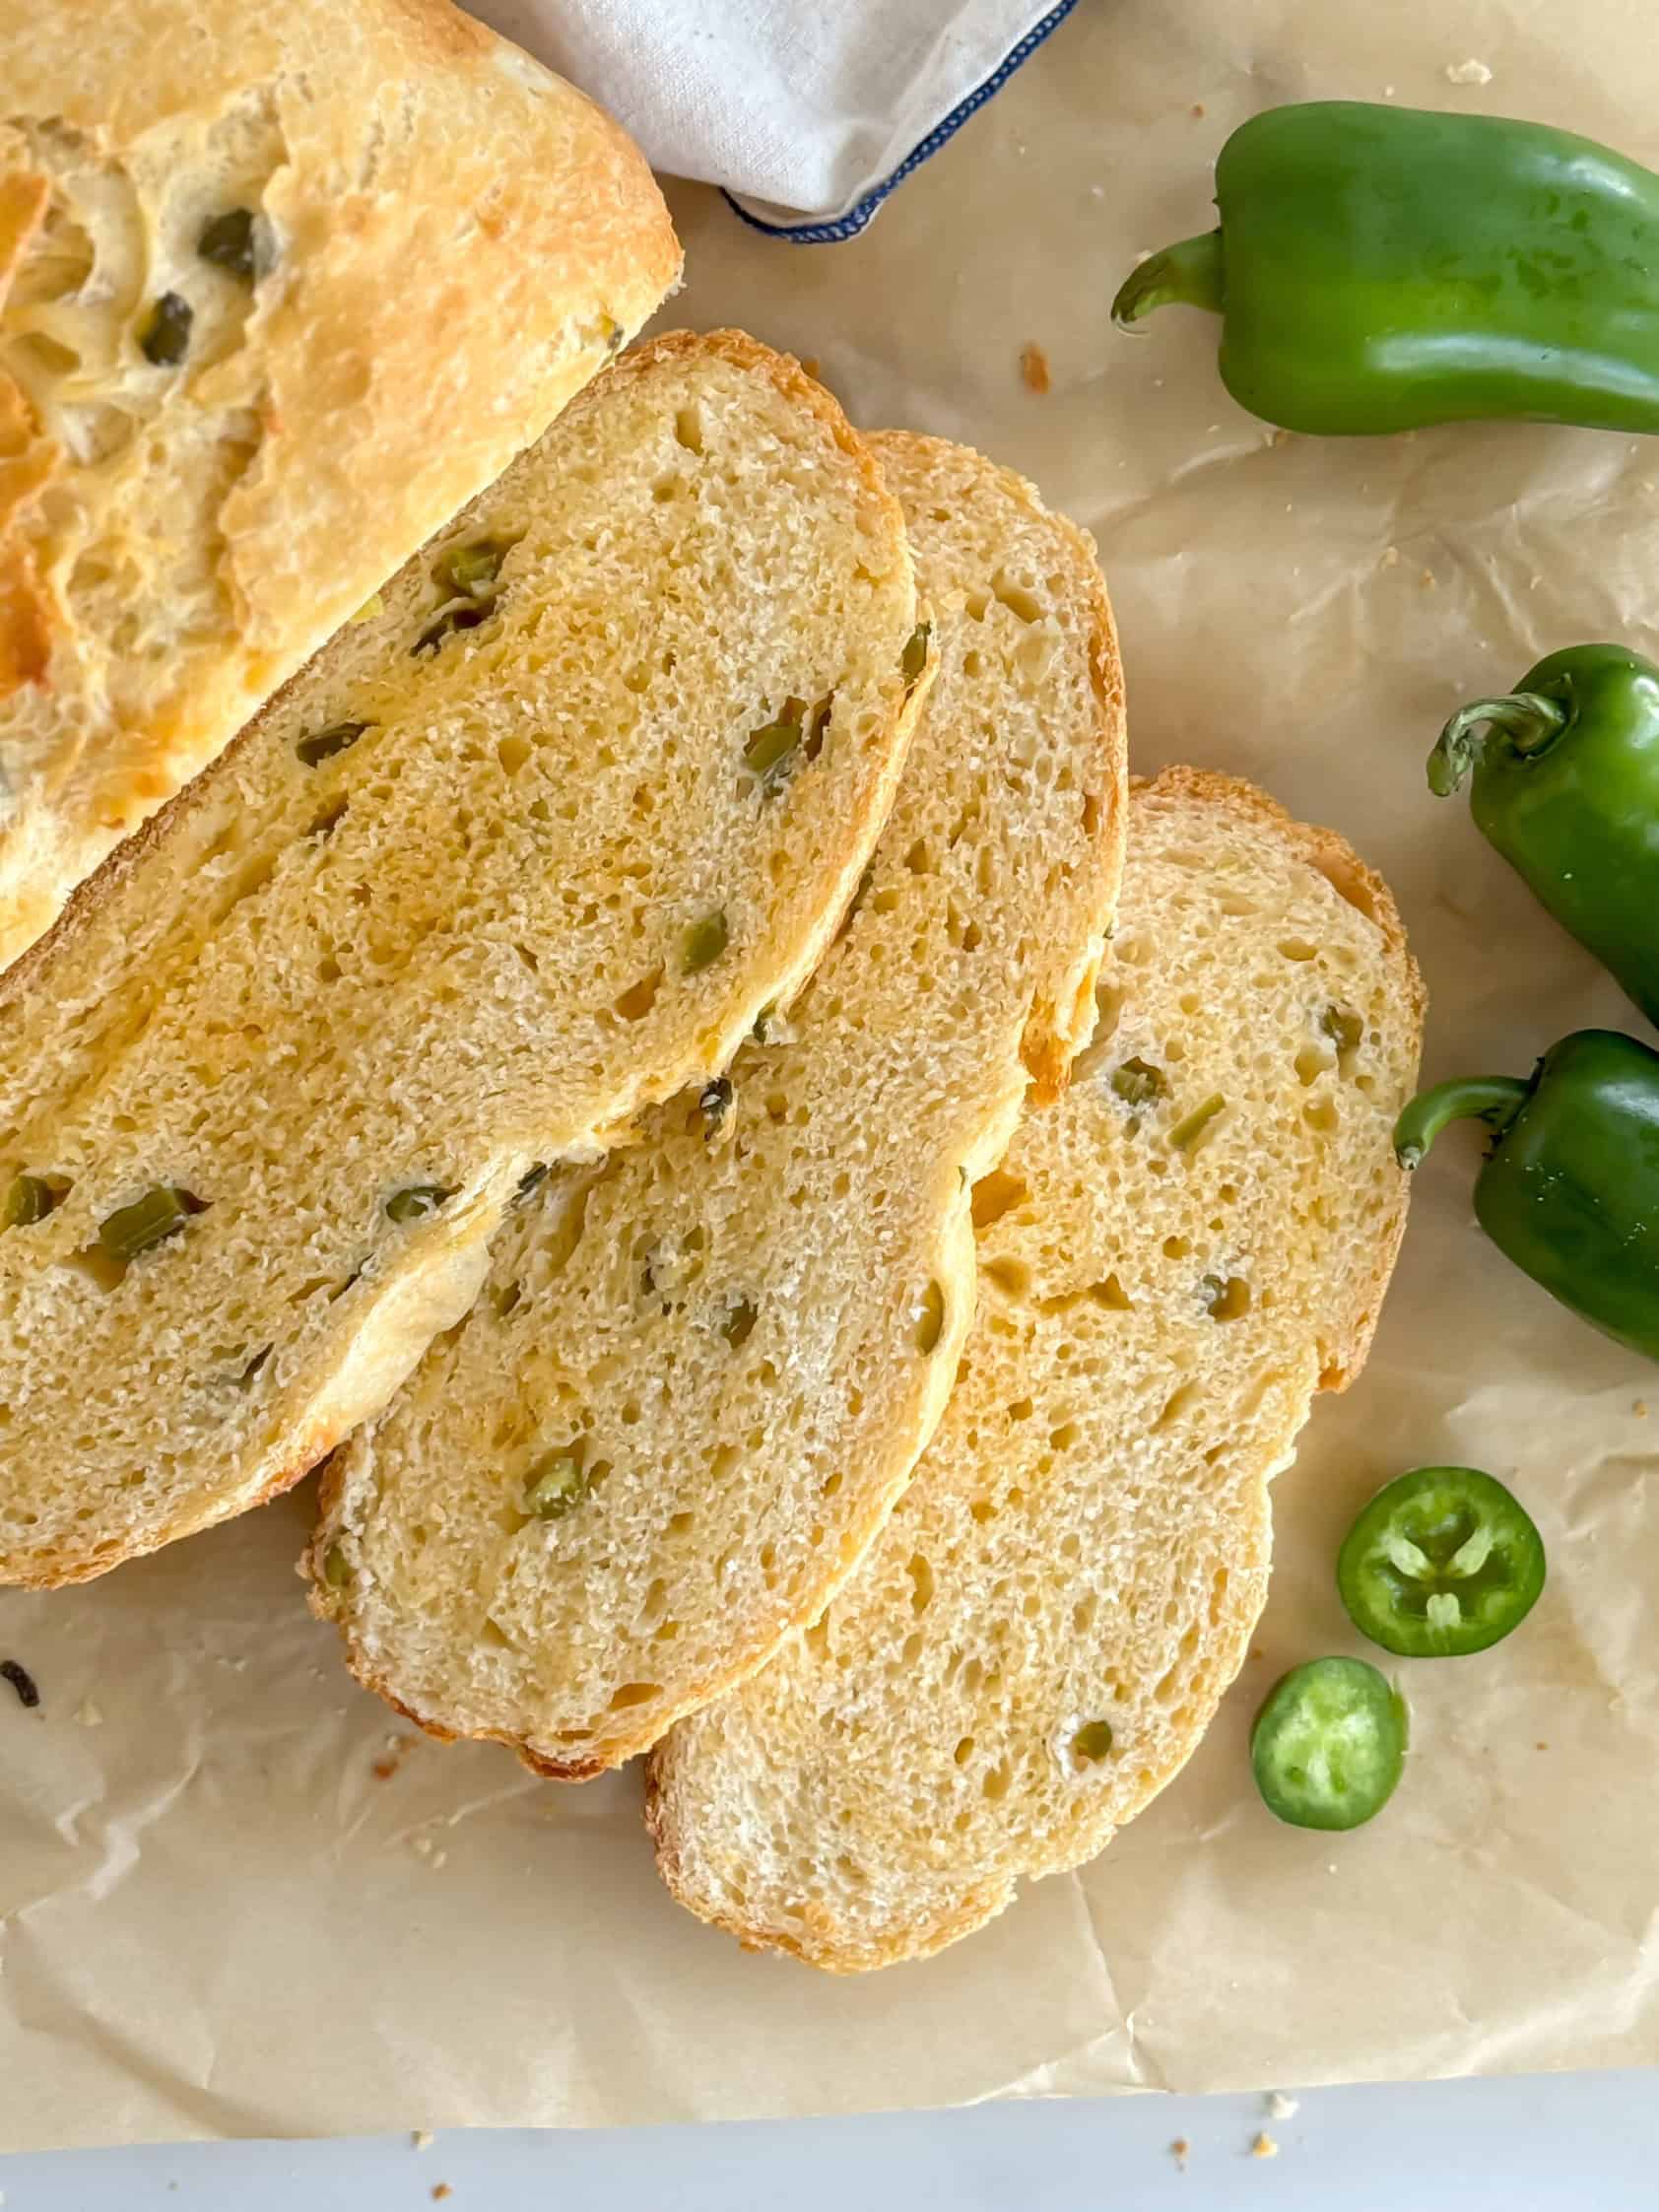 Sliced bread with visible jalapeño and cheese pieces on parchment paper, surrounded by fresh jalapeños.